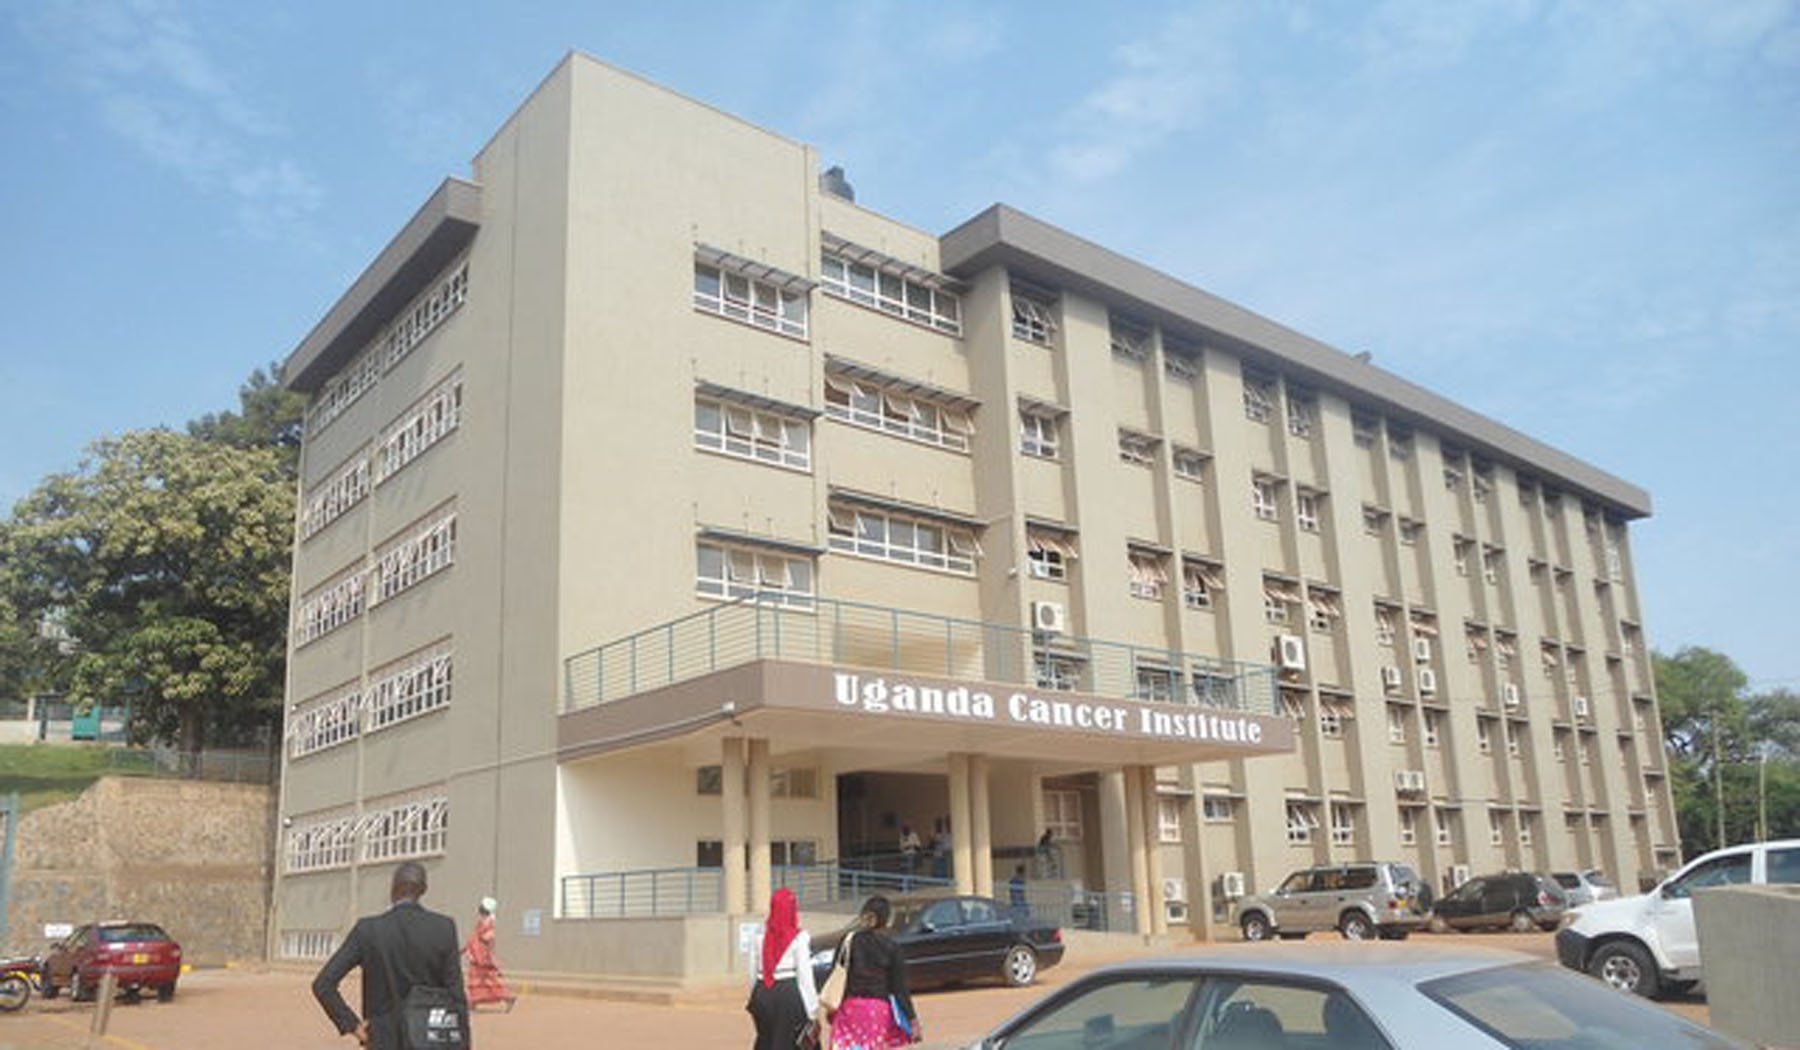 The Uganda Cancer Institute (UCI) is establishing 4 regional Cancer Institutes across the country.